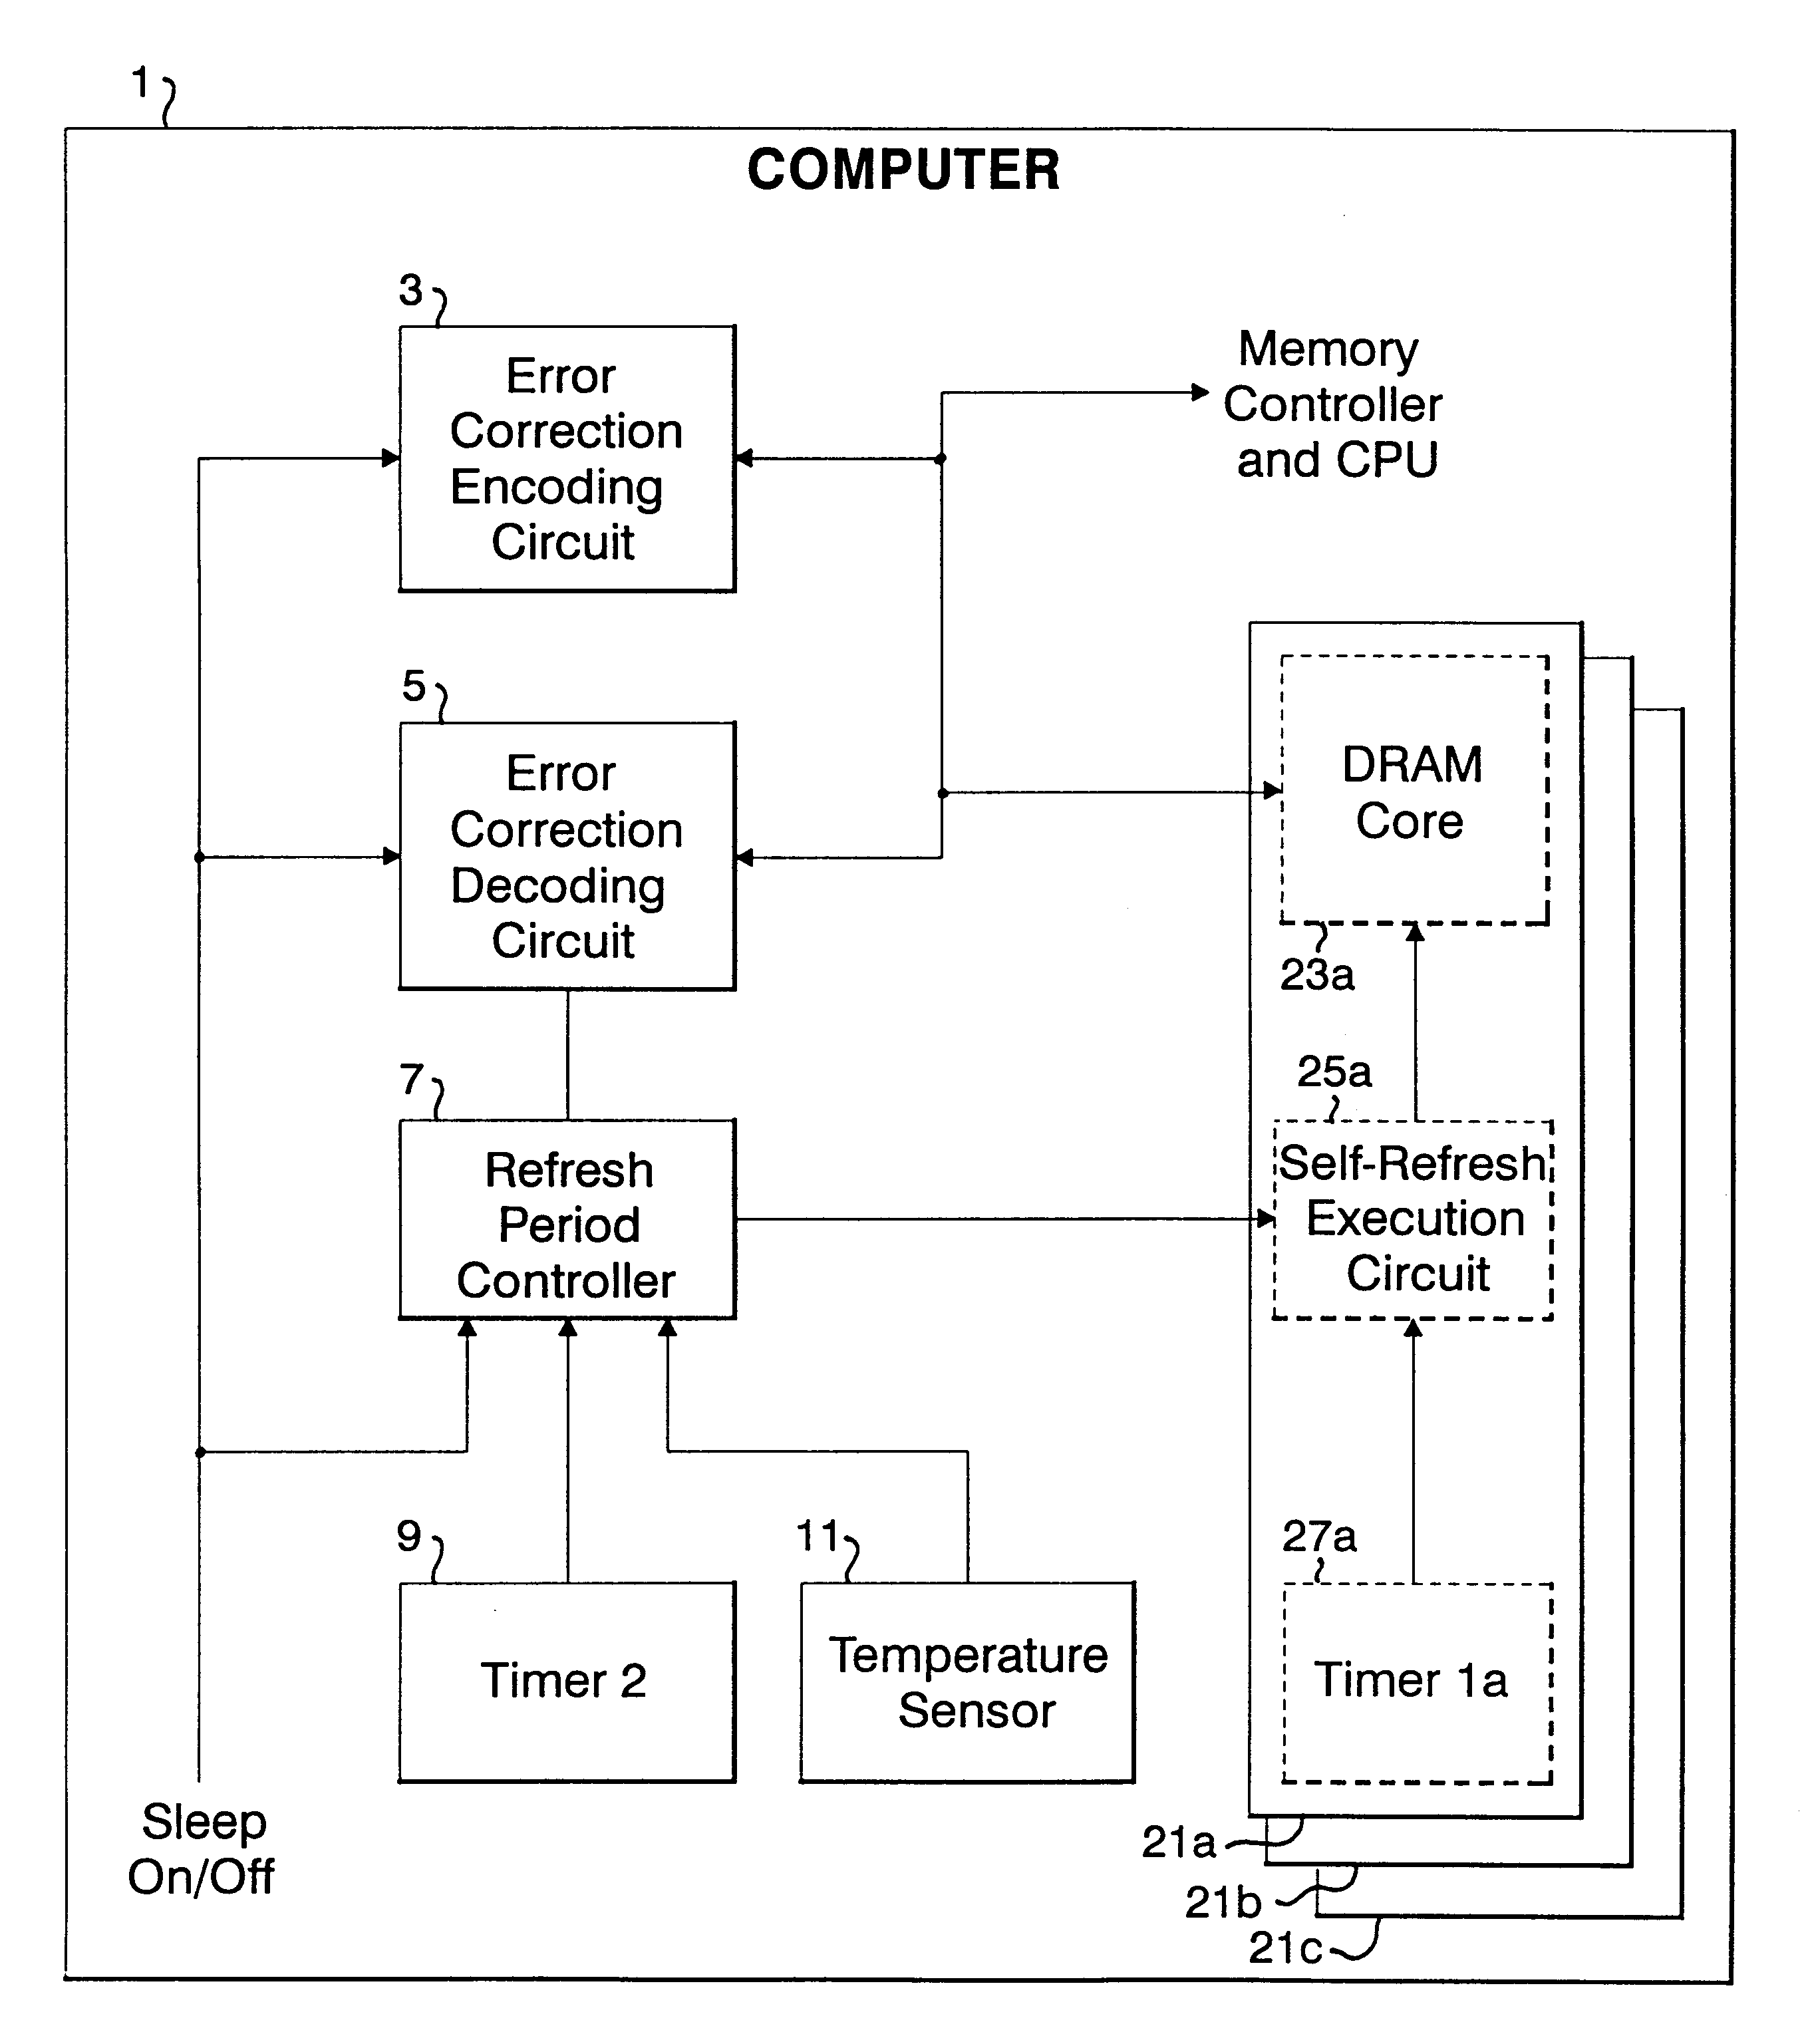 Refresh period control apparatus and method, and computer